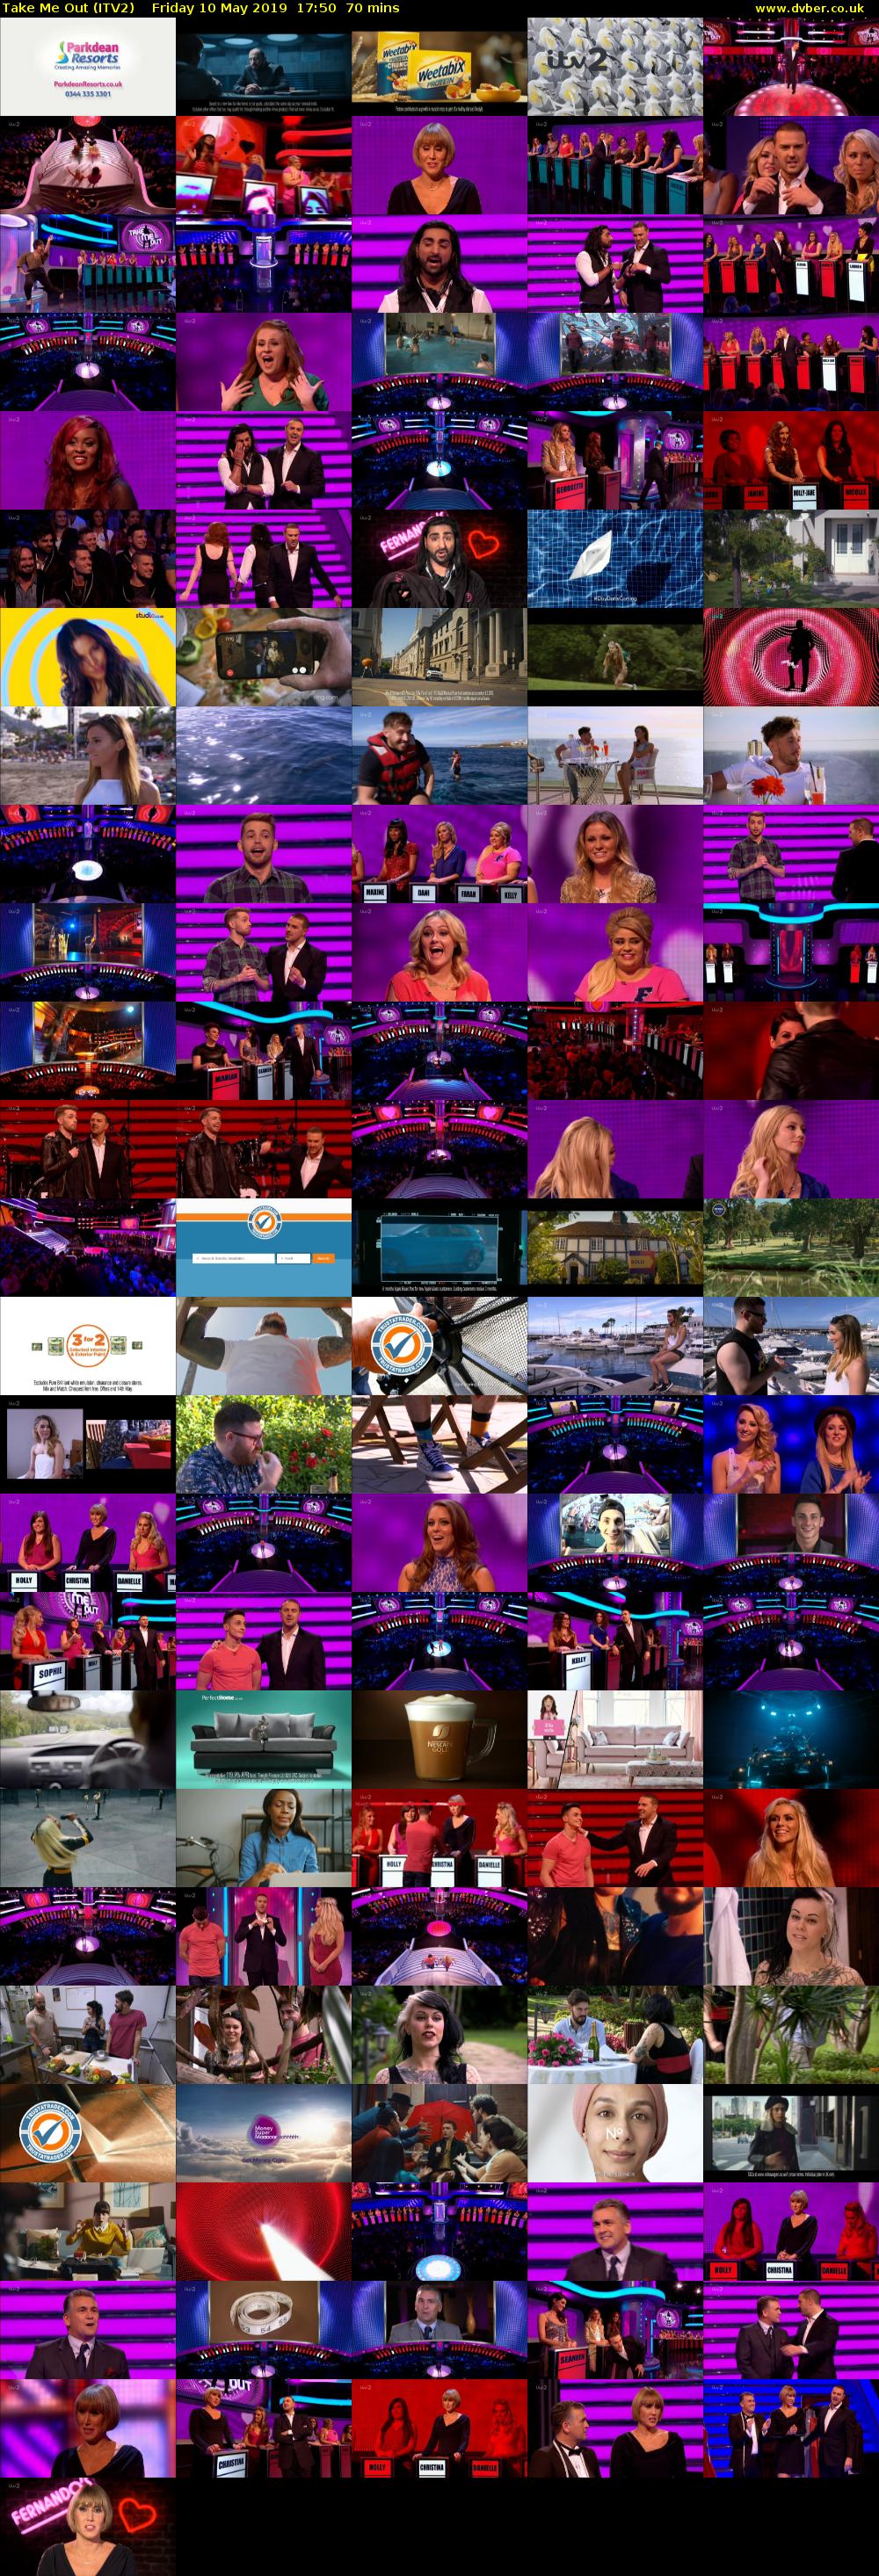 Take Me Out (ITV2) Friday 10 May 2019 17:50 - 19:00